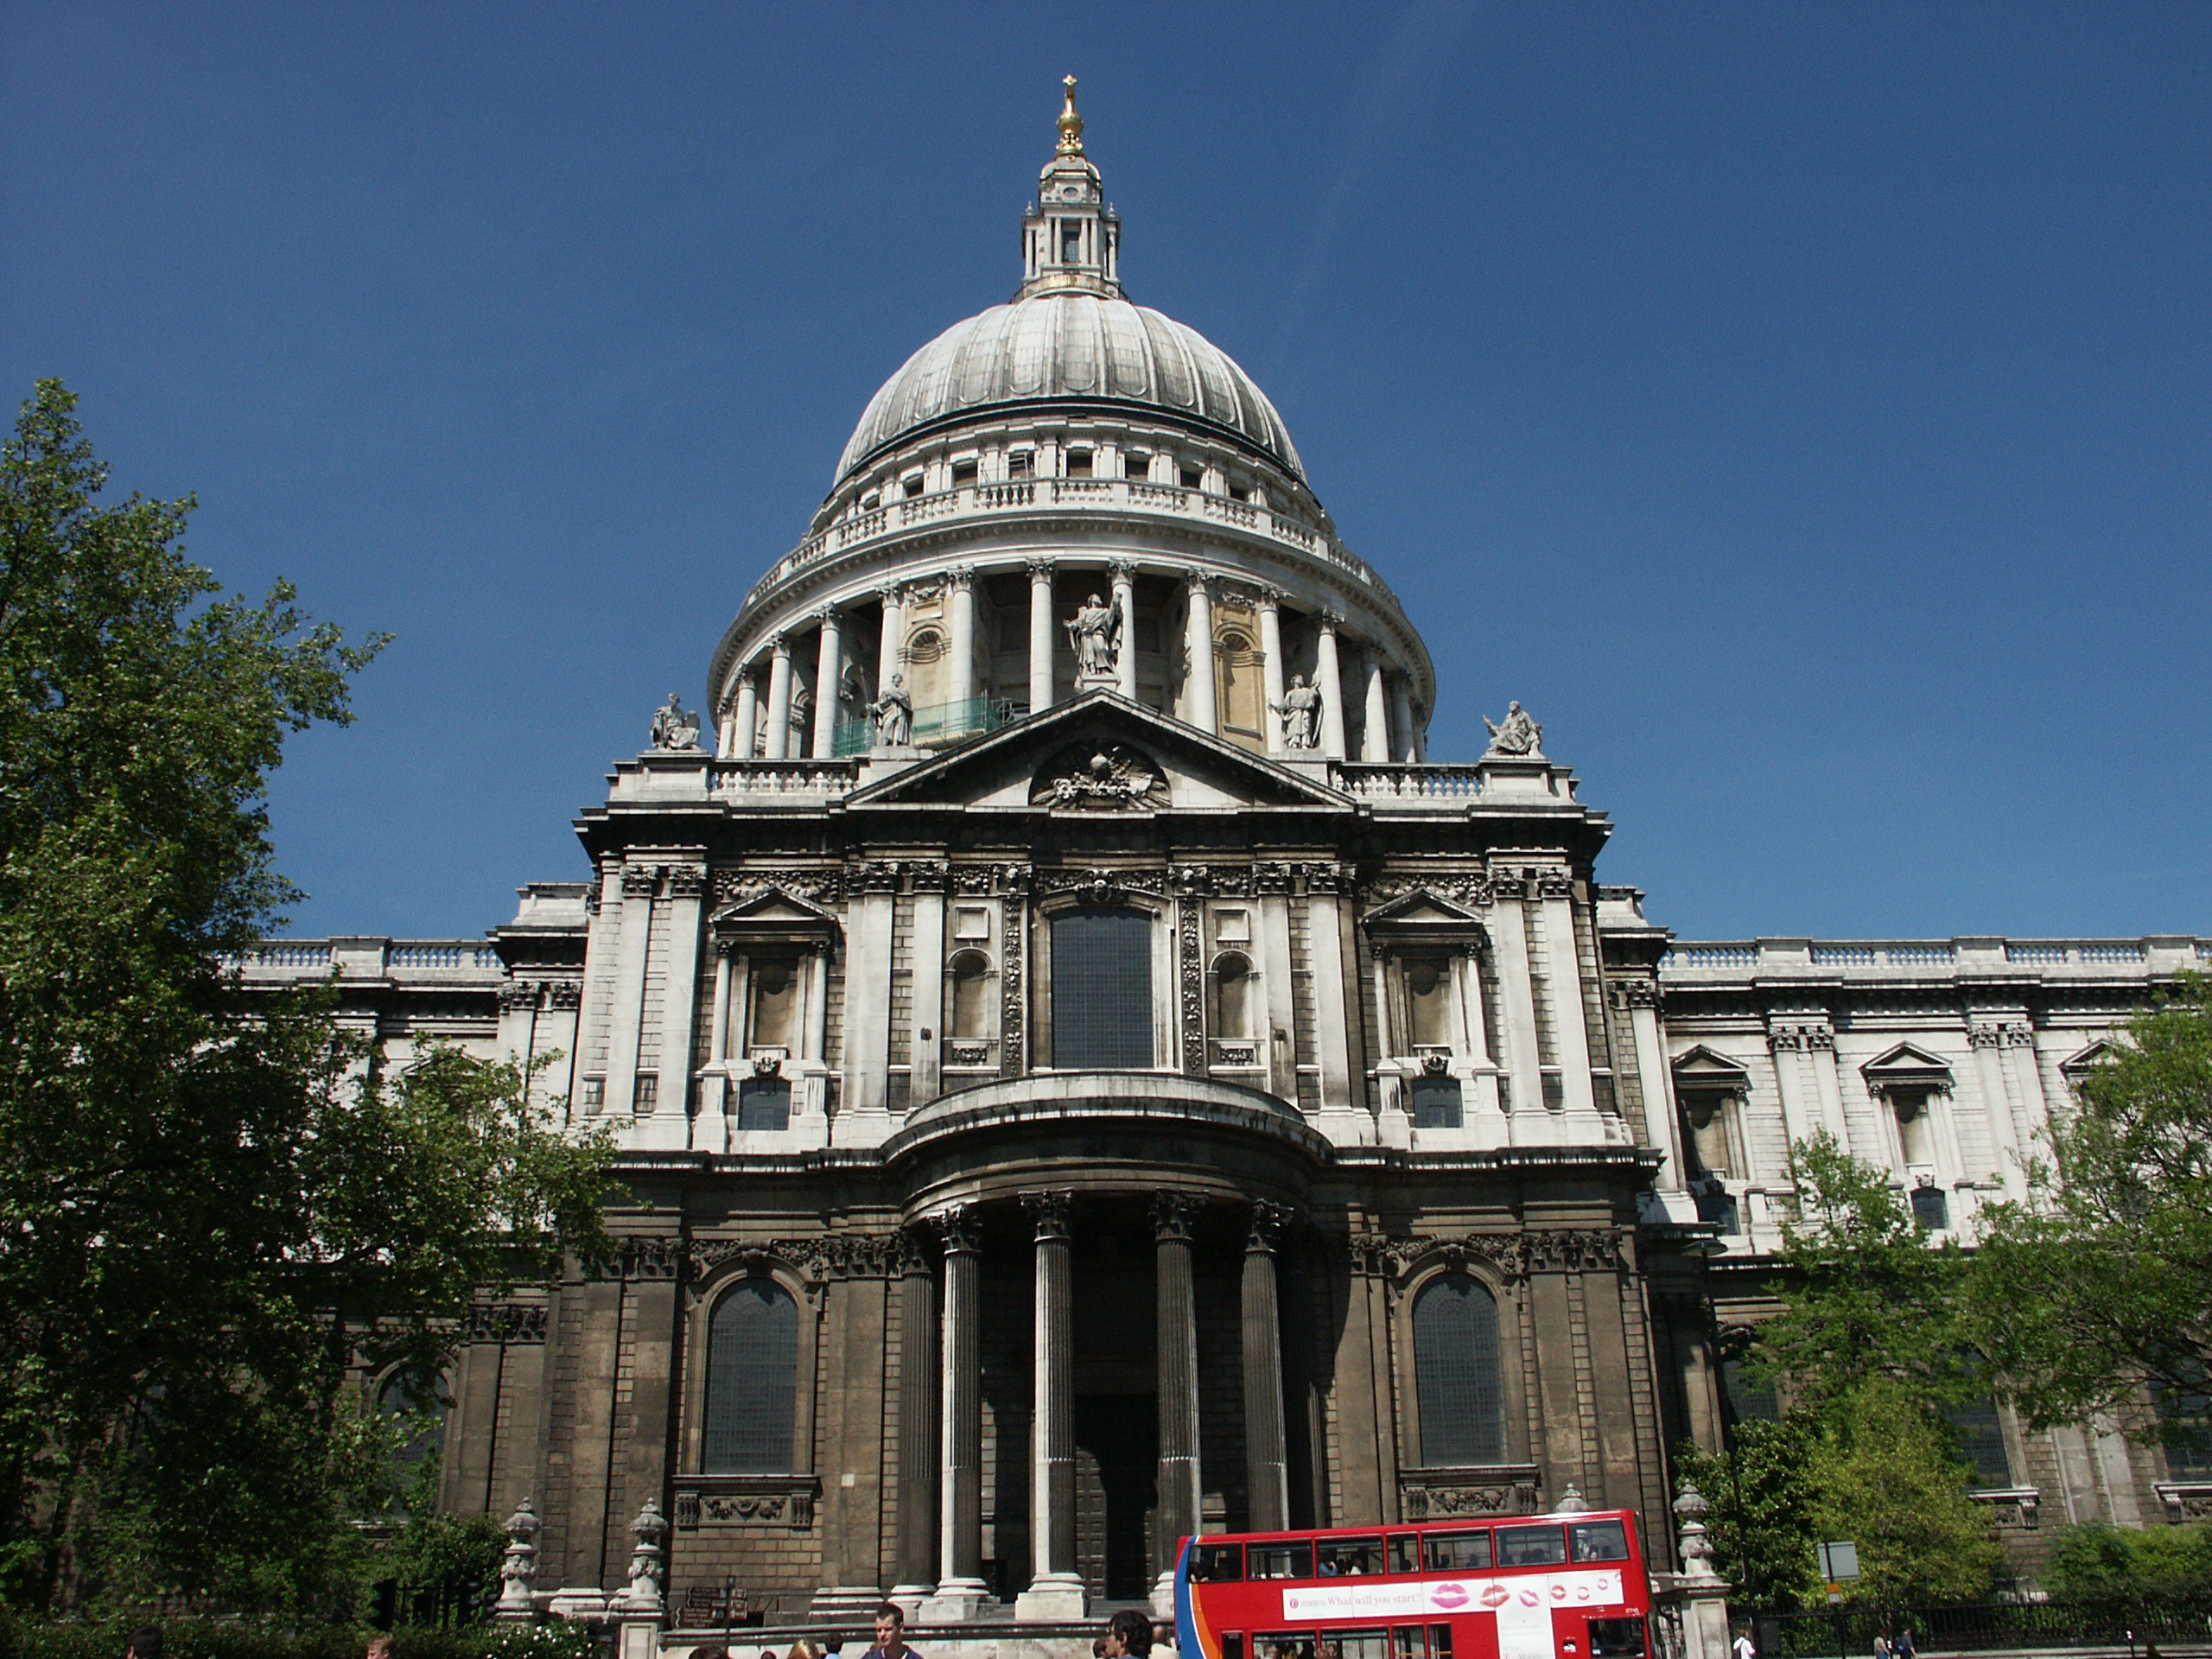 St. Paul's cathedral in London. Photo by <a href="http://www.flickr.com/photos/bruchez/">Olivier Bruchez</a>